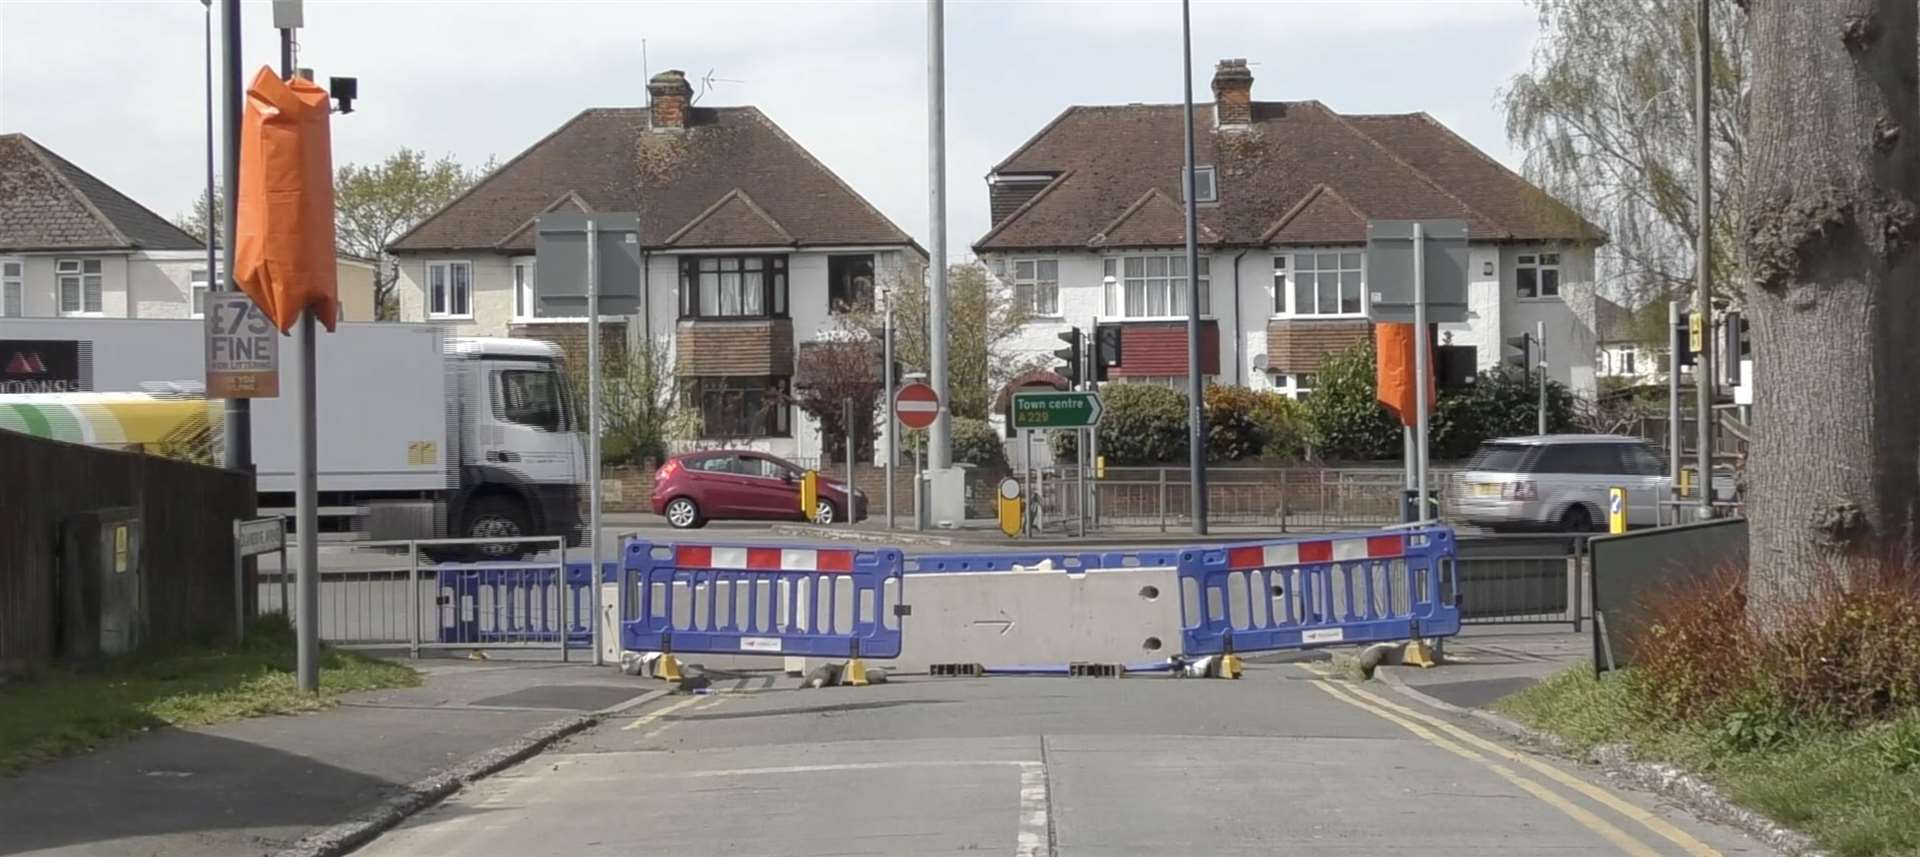 Access to Cranborne Avenue will be closed for six months